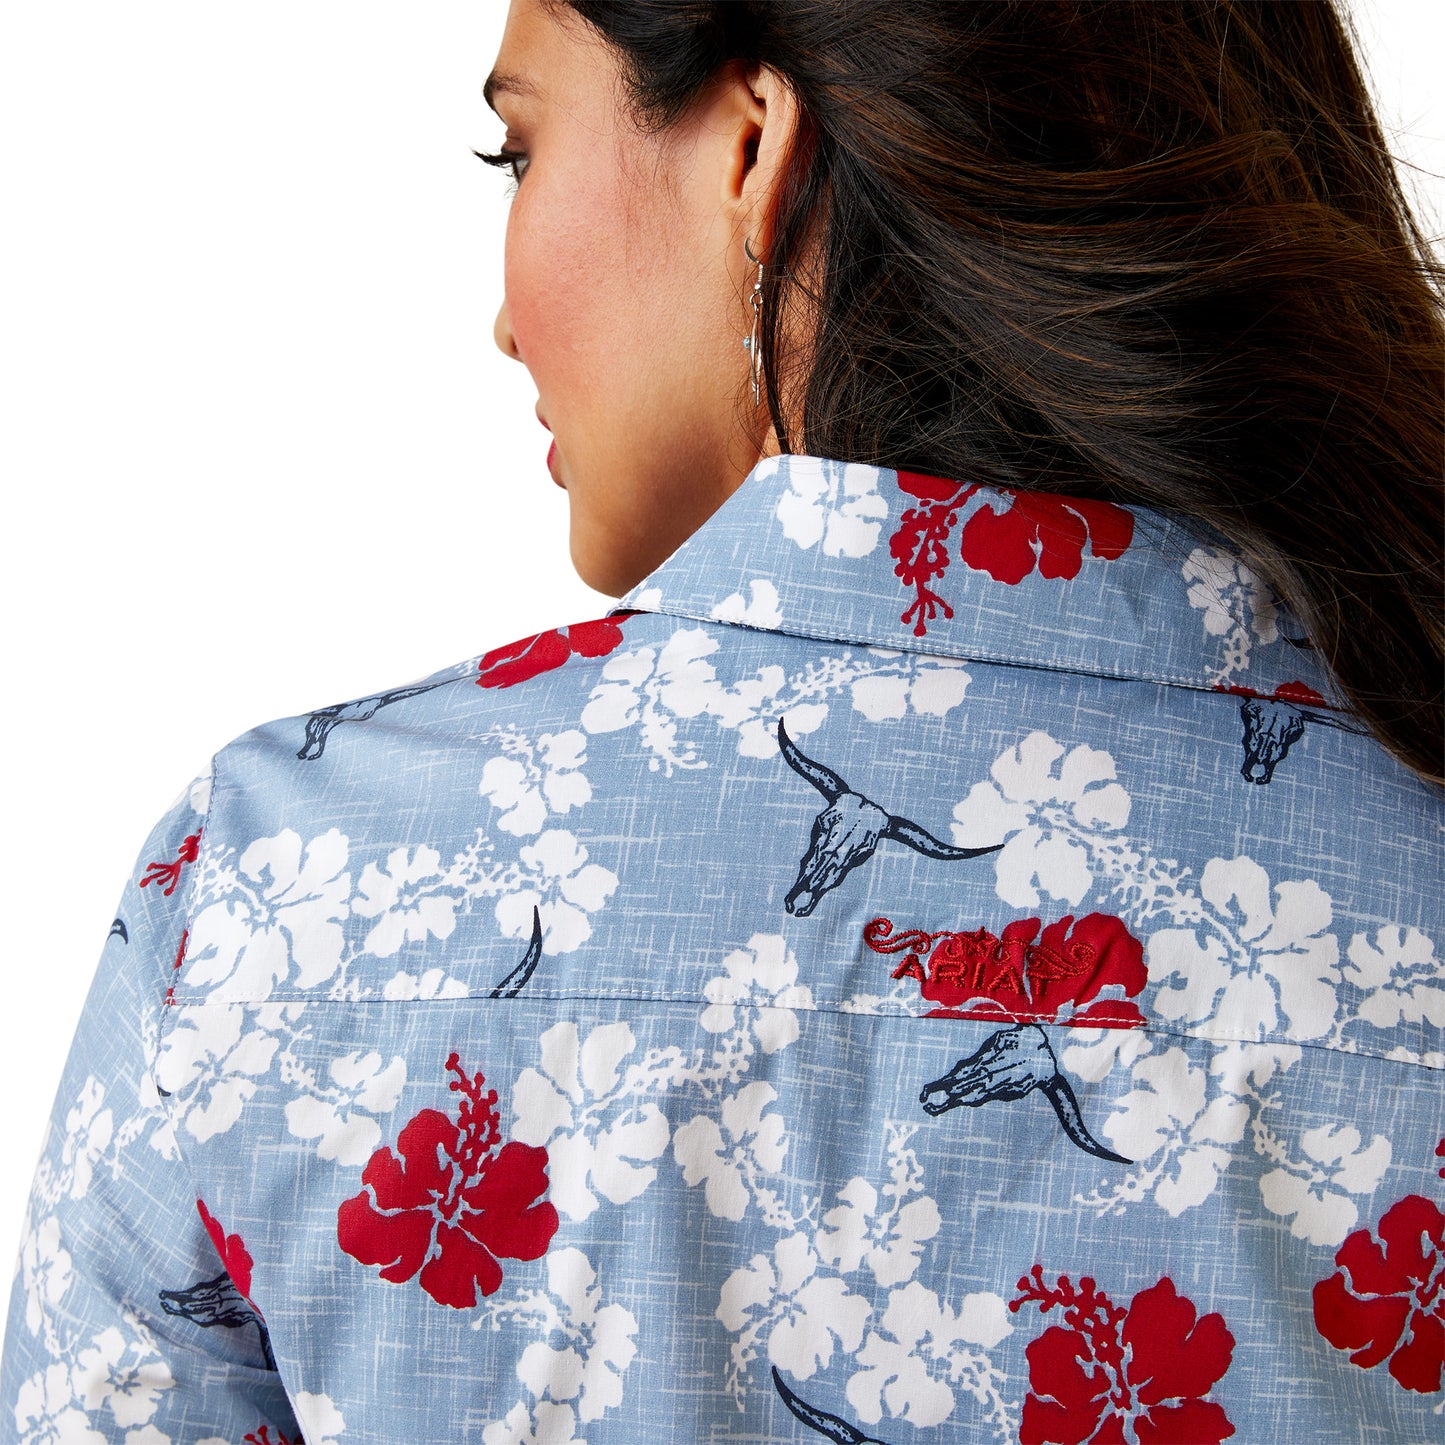 ARIAT LADIES ALOHA BLUE & RED FLORAL LONG SLEEVE SHIRT